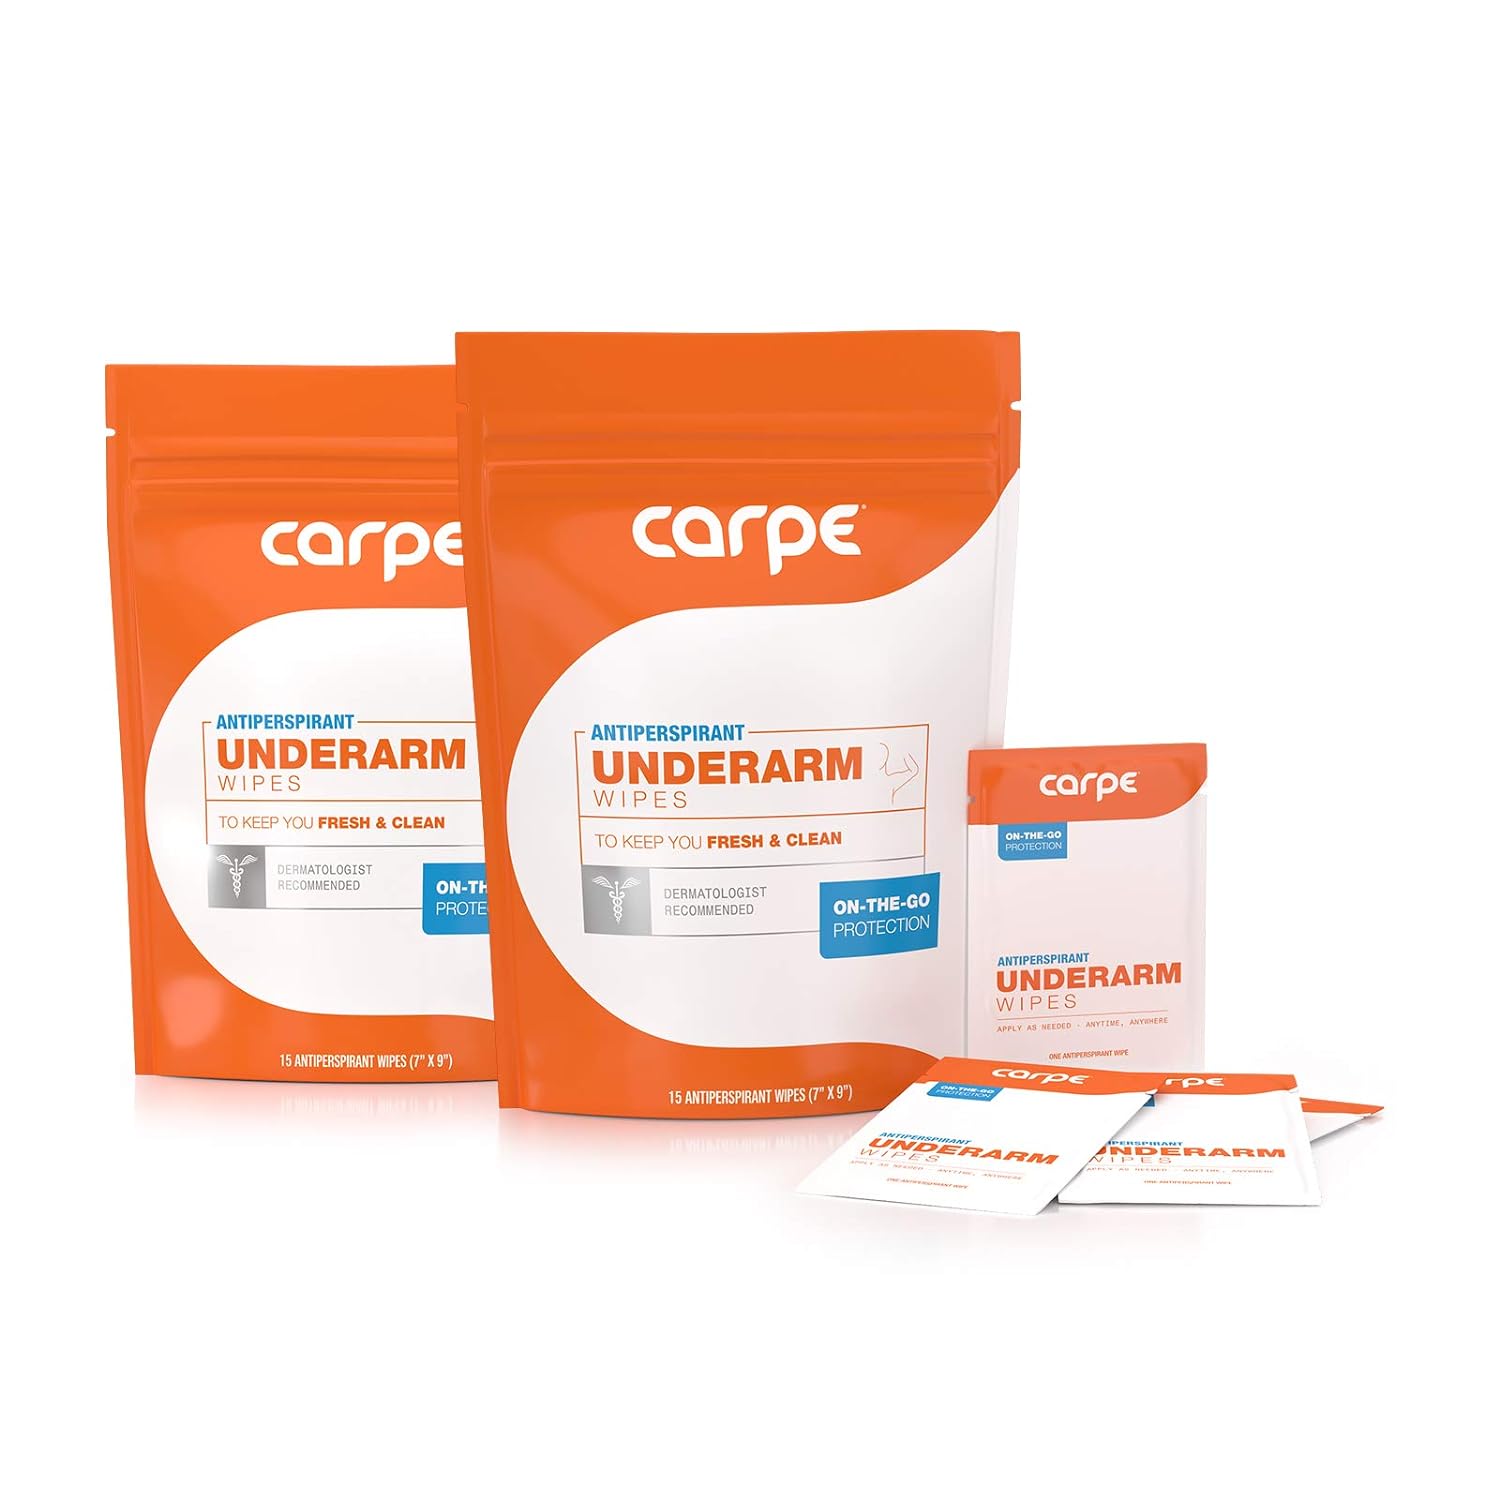 Carpe On-the-Go Antiperspirant Underarm Wipes (Pack of 2 Boxes) for Sweat Blocking, Deodorizing, and Cleansing When You're On the Move - 30 Residue Free, Individually Wrapped Wipes